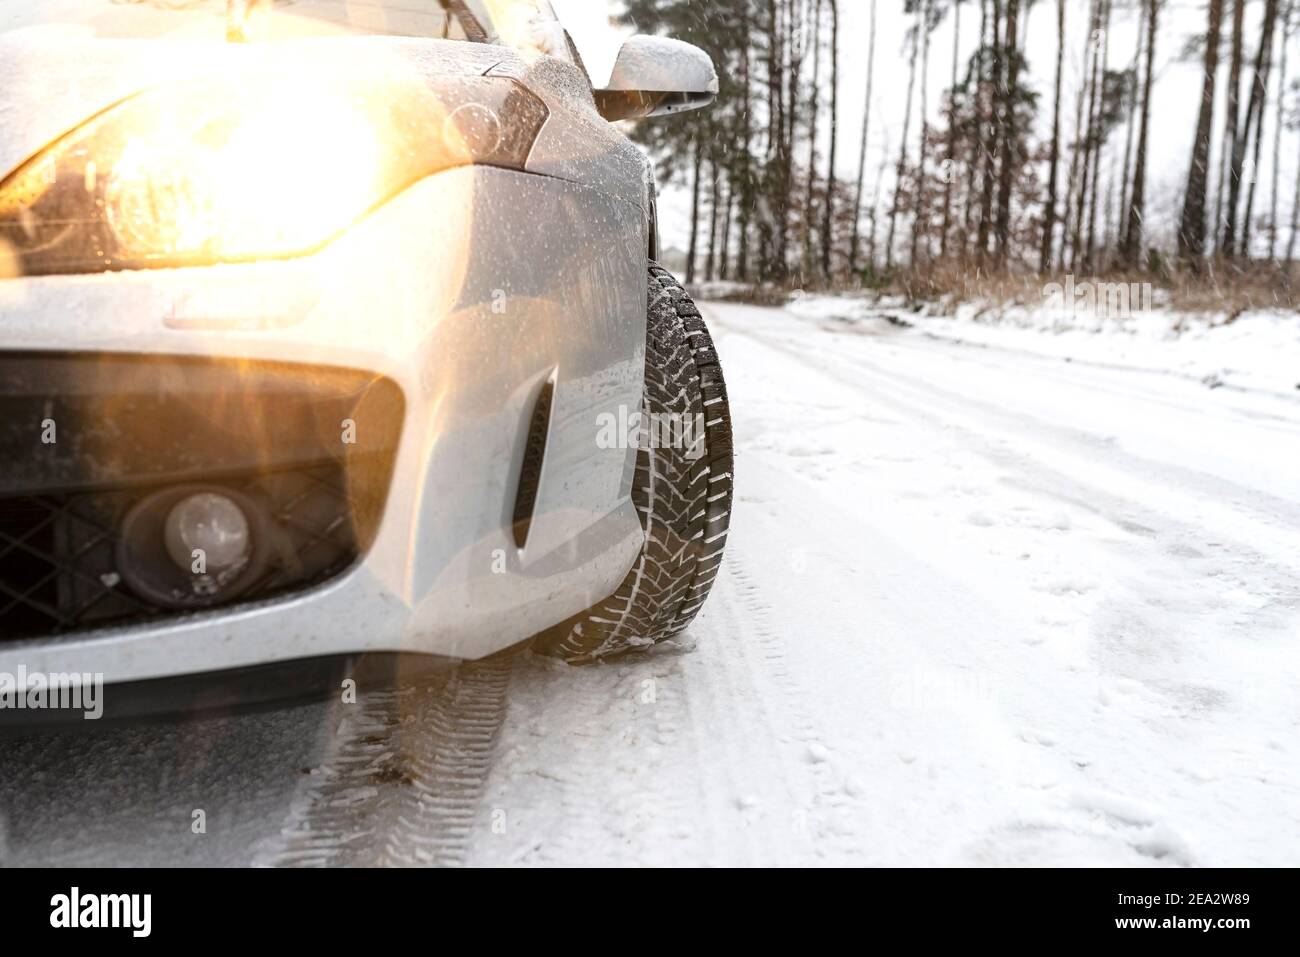 The dipped headlights on a silver car standing on a snowy road in the forest, visible new winter tire and falling snow. Stock Photo